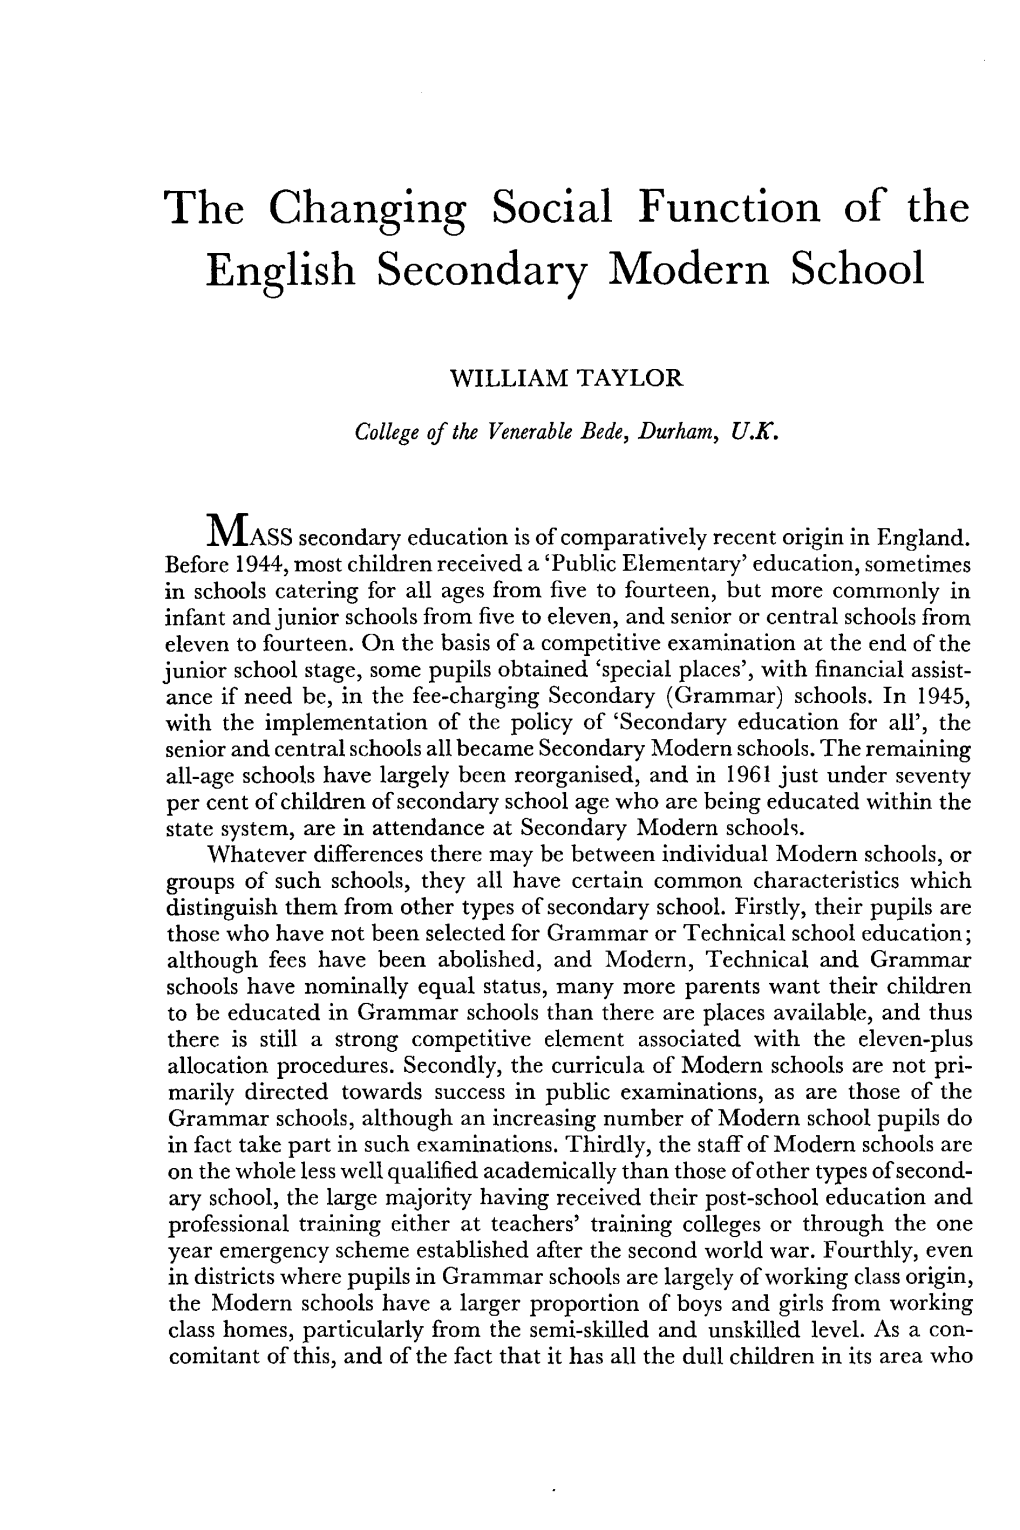 The Changing Social Function of the English Secondary Modern School